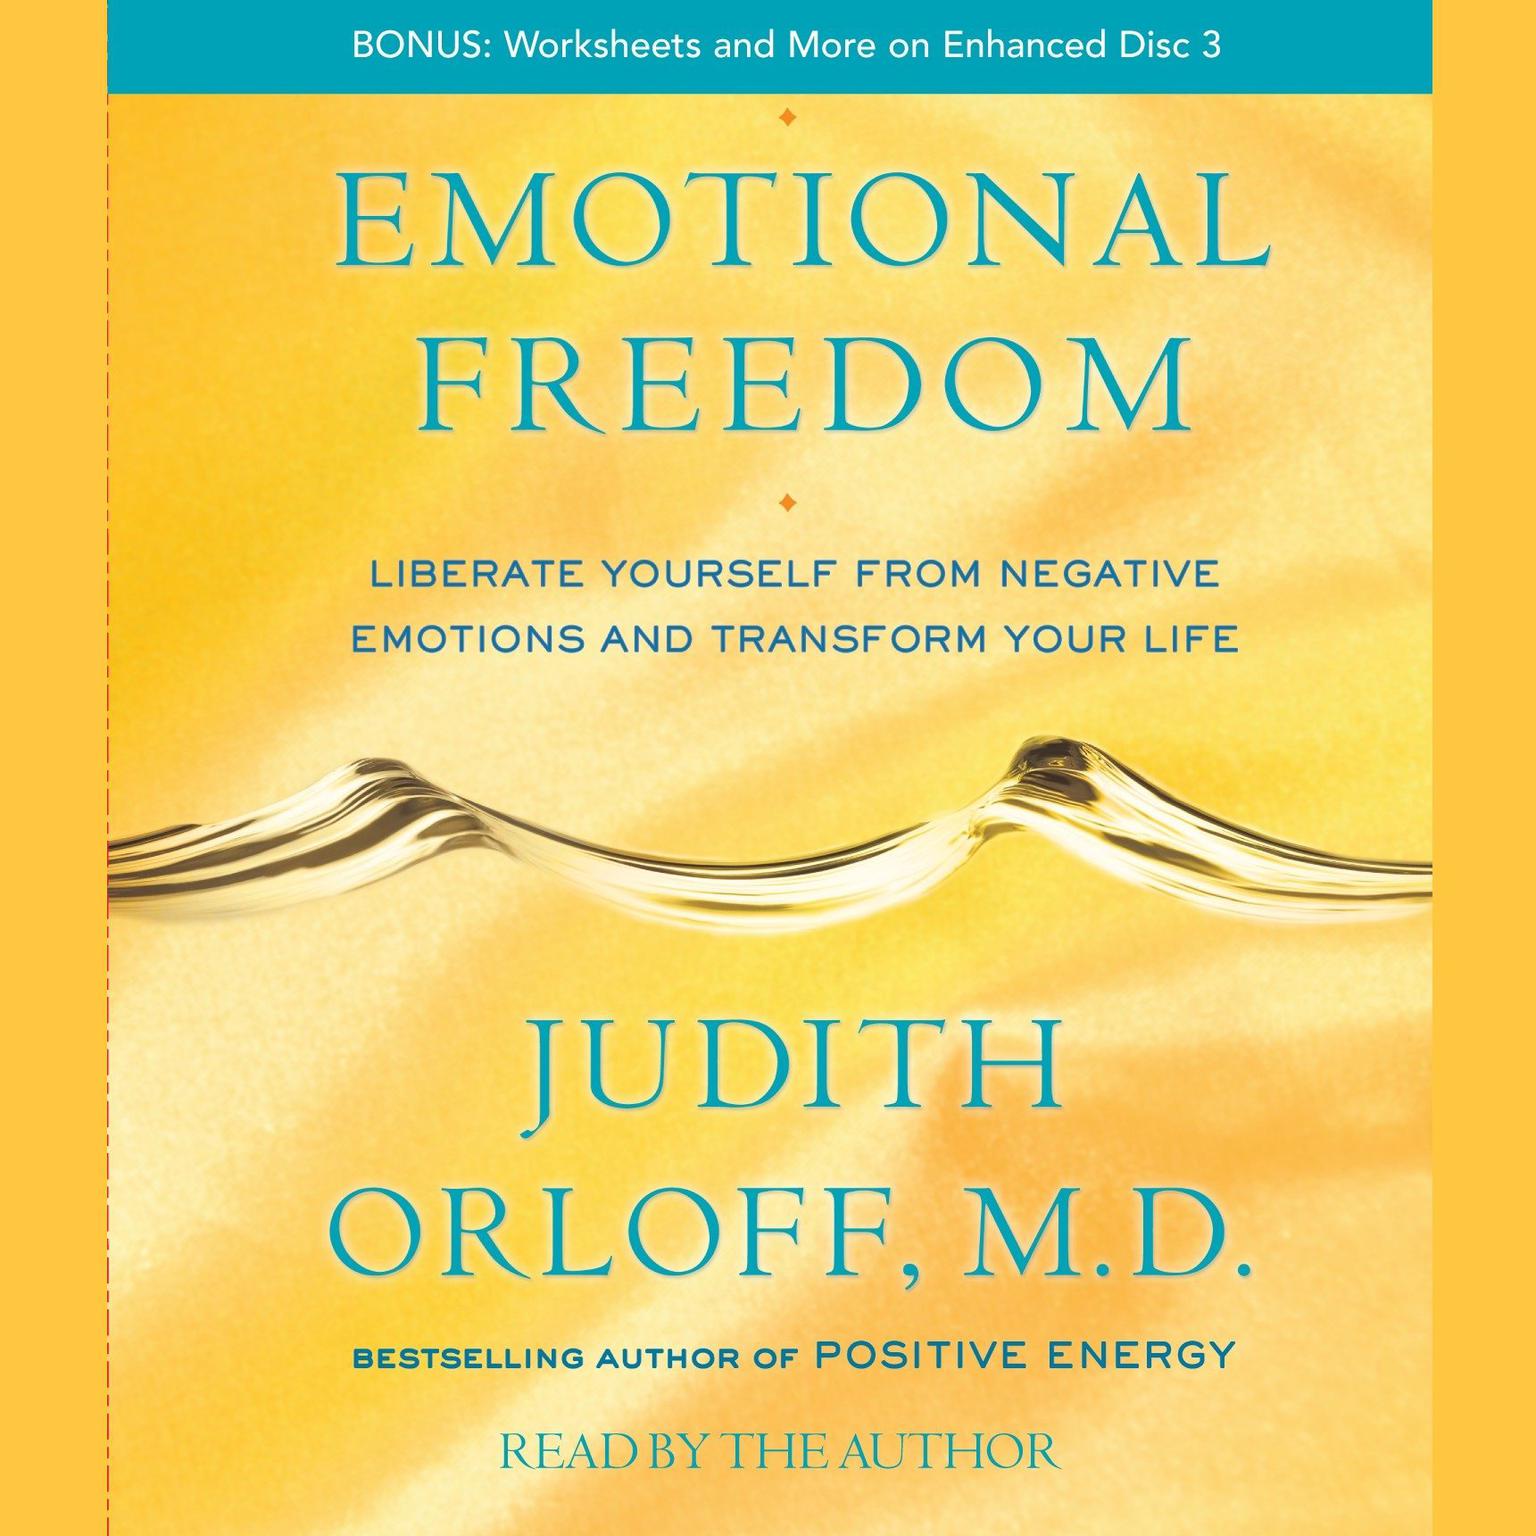 Emotional Freedom (Abridged): Liberate Yourself From Negative Emotions and Transform Your Life Audiobook, by Judith Orloff